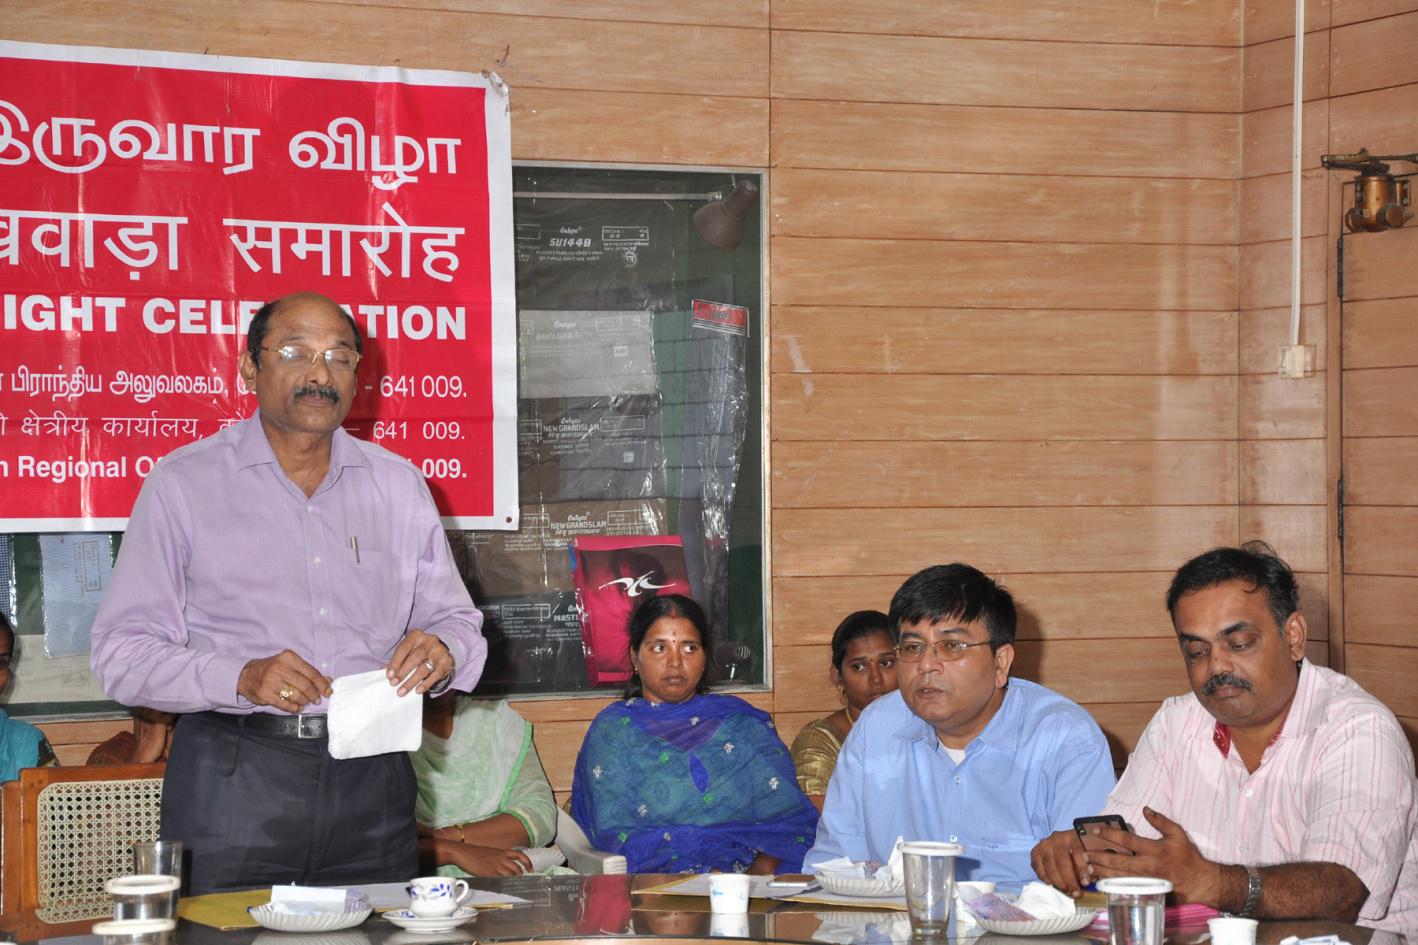 Shri A. Arulsamy, Executive Director, S R O addressing the Officers and Employees on the occasion of Hindi Fortnight Prize Distribution Function held on 26.09.2016 at NTC Ltd., Southern Regional Office, Coimbatore